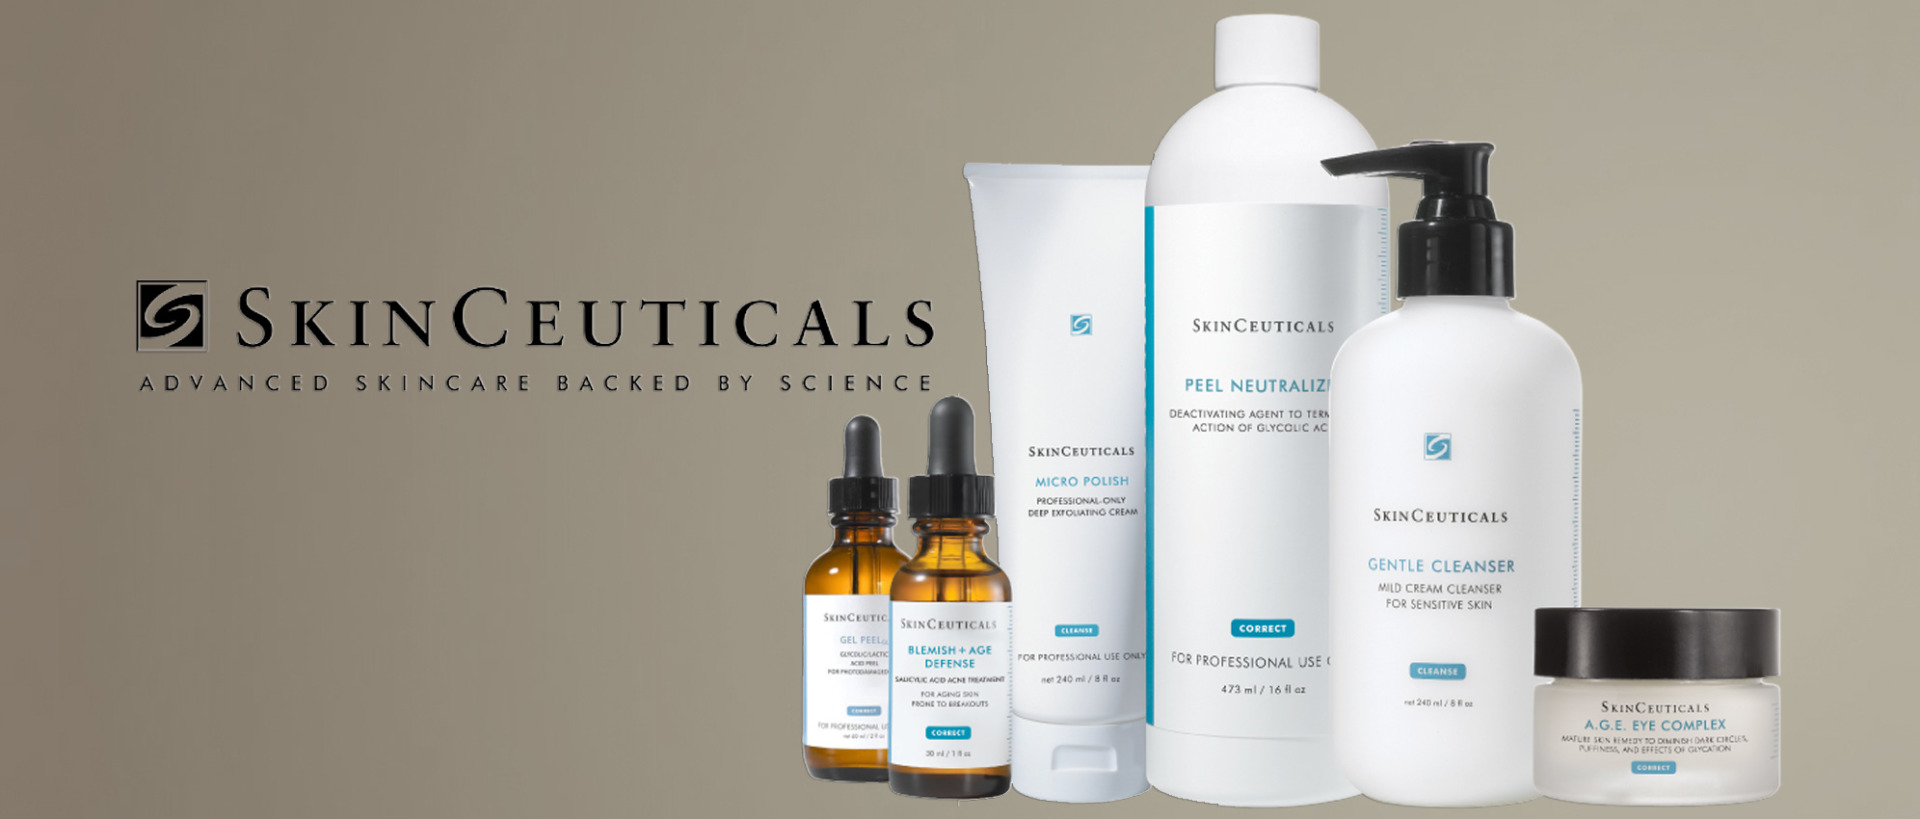 SkinCeuticals – The Most Effective Antioxidant on the Market!